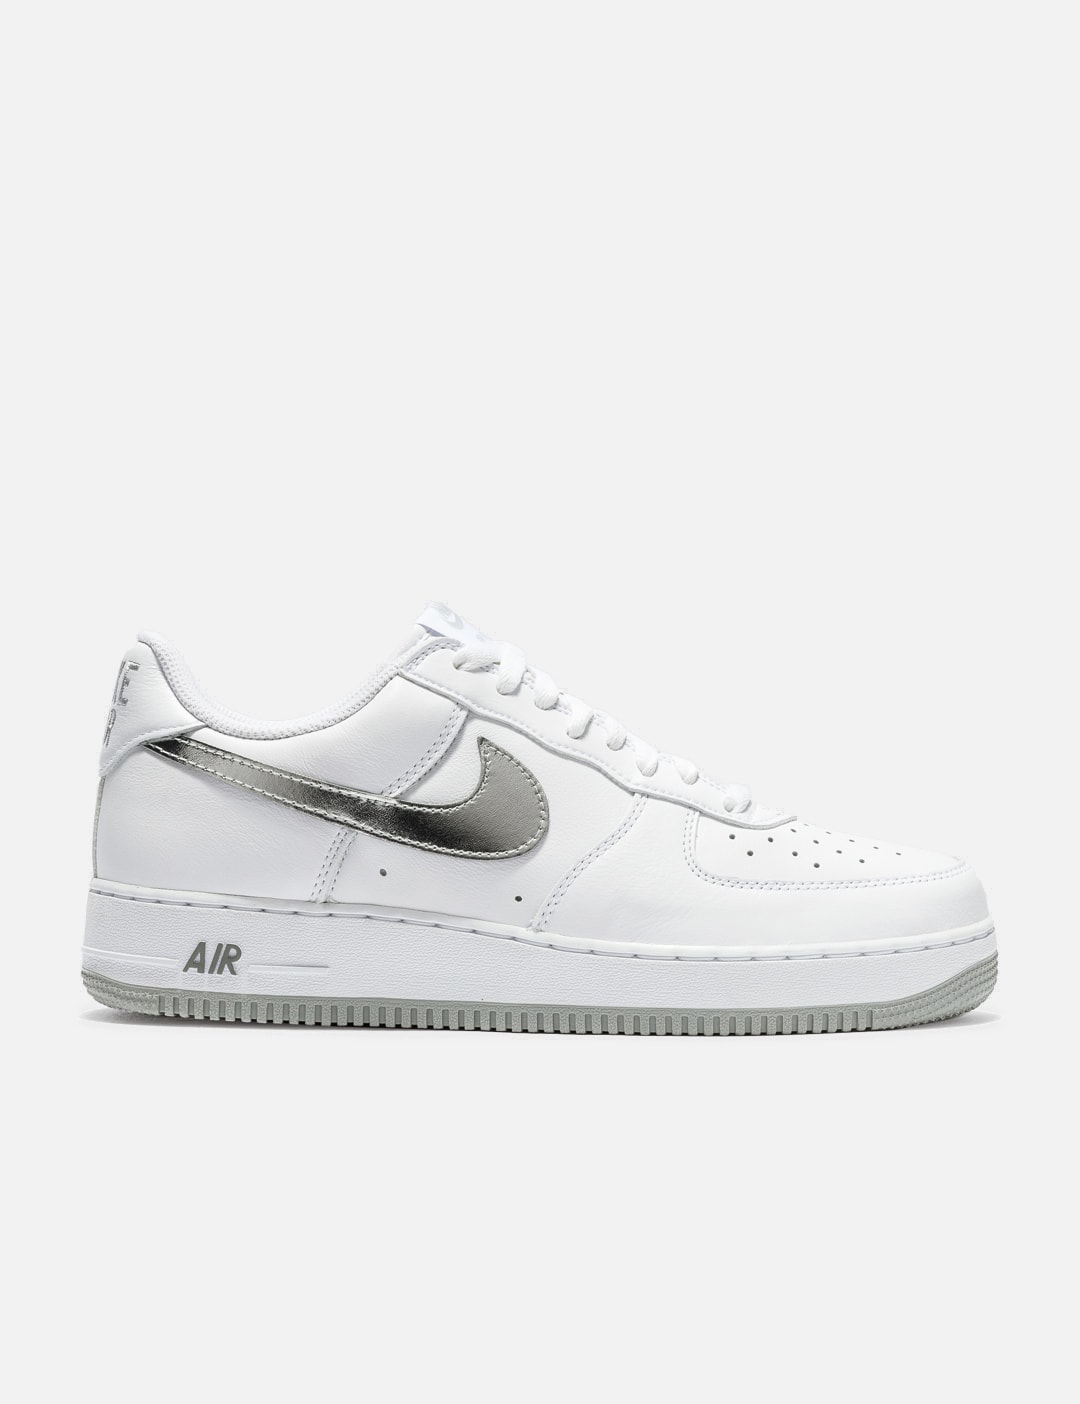 Aplastar Triplicar dolor de cabeza Nike - Nike Air Force 1 Low Retro | HBX - Globally Curated Fashion and  Lifestyle by Hypebeast